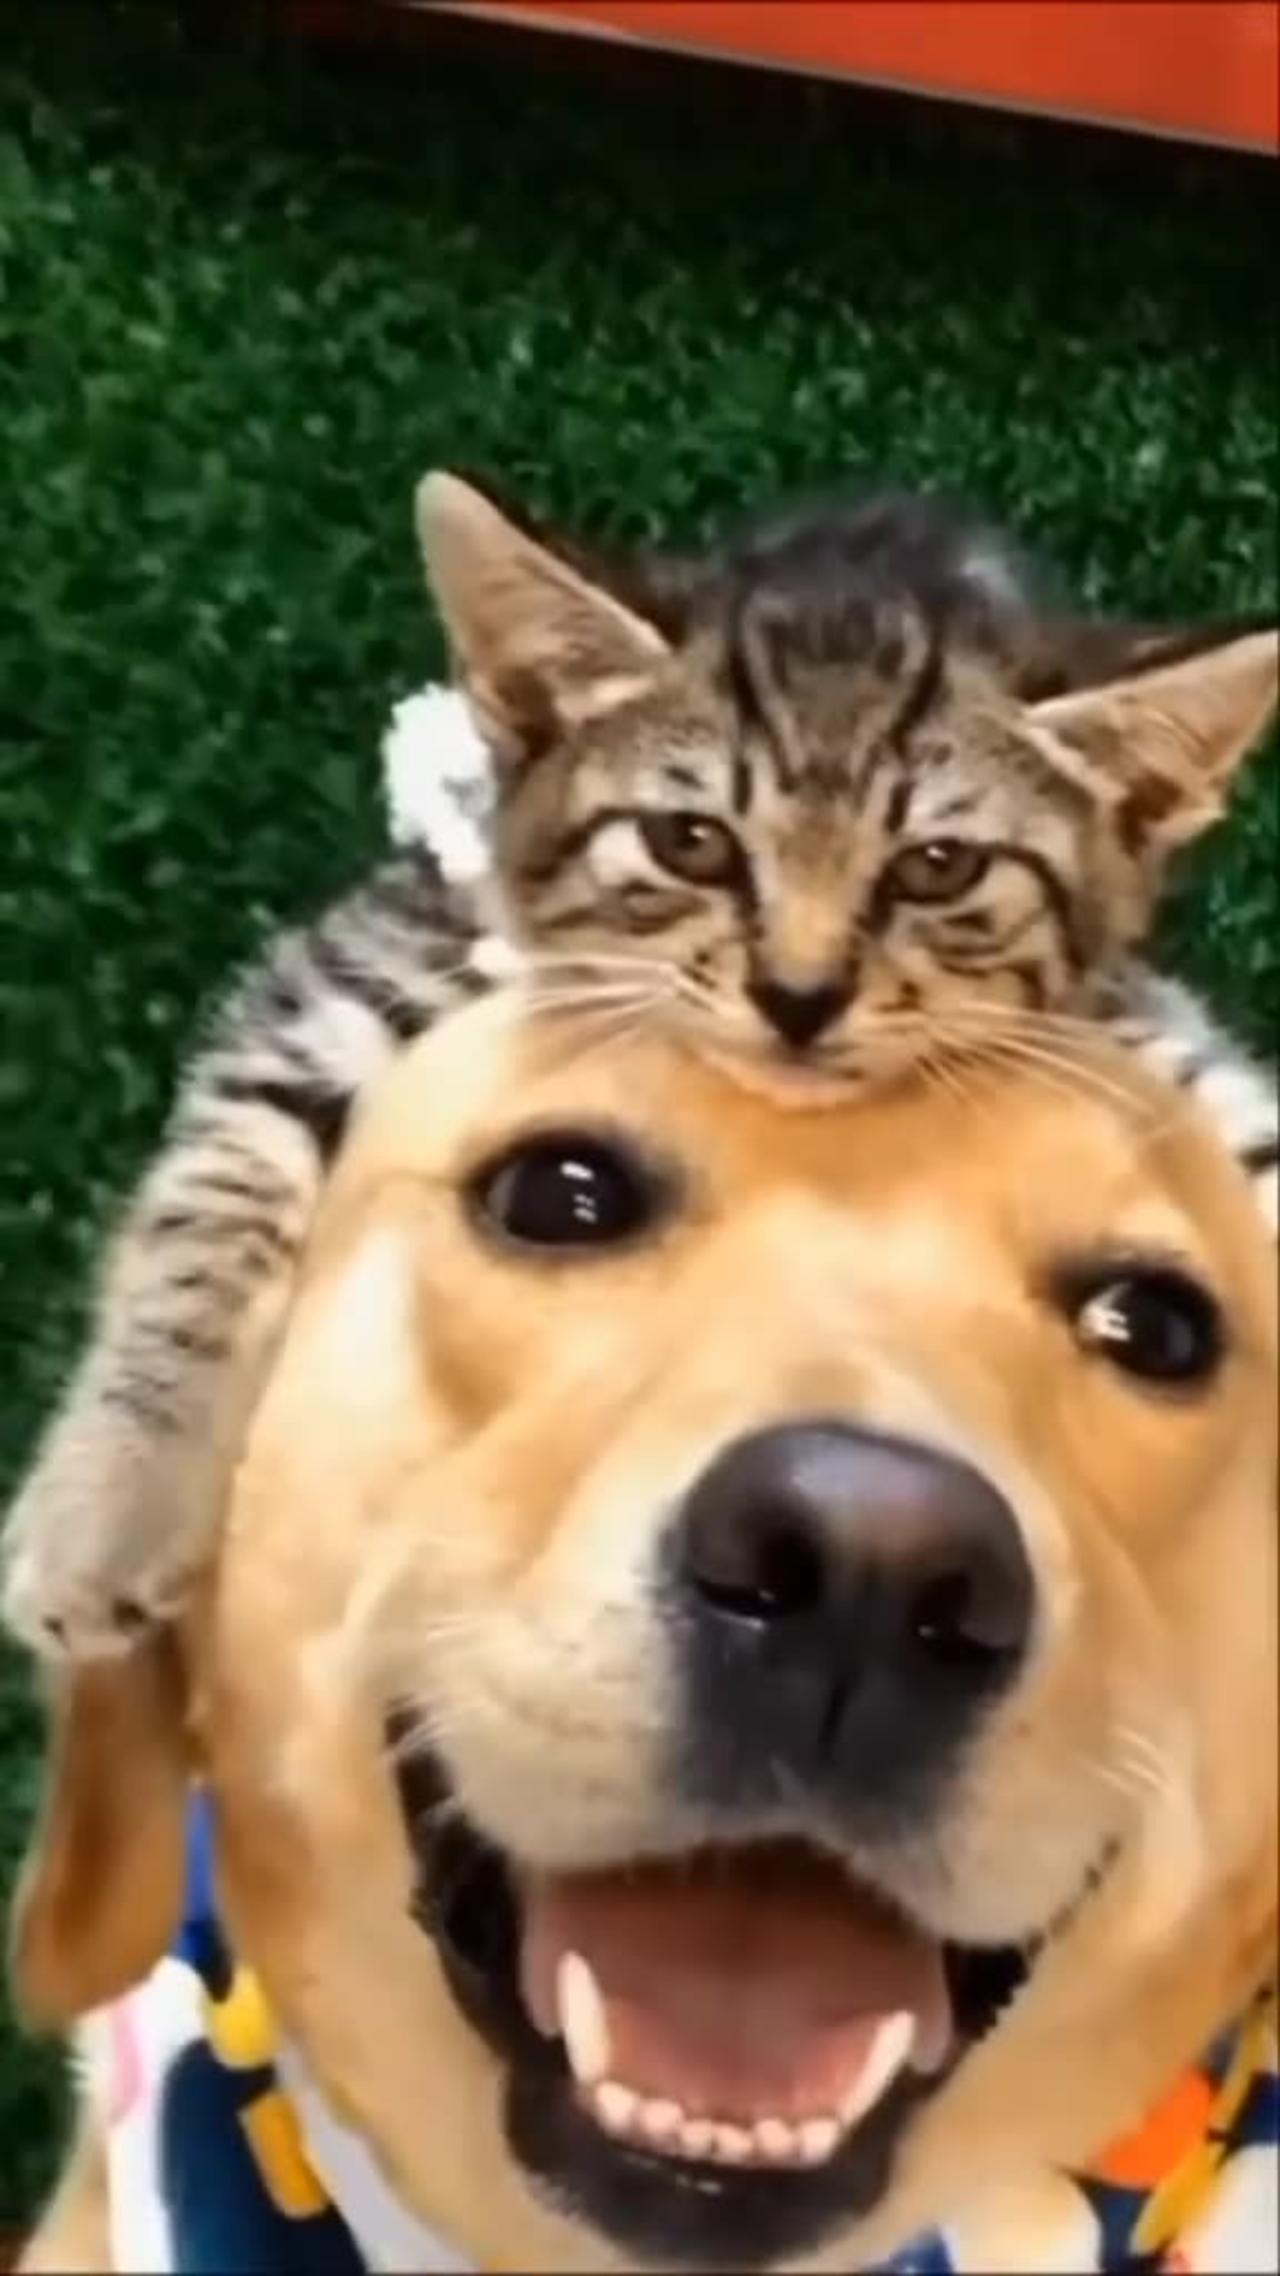 Dogs & cats funny clip